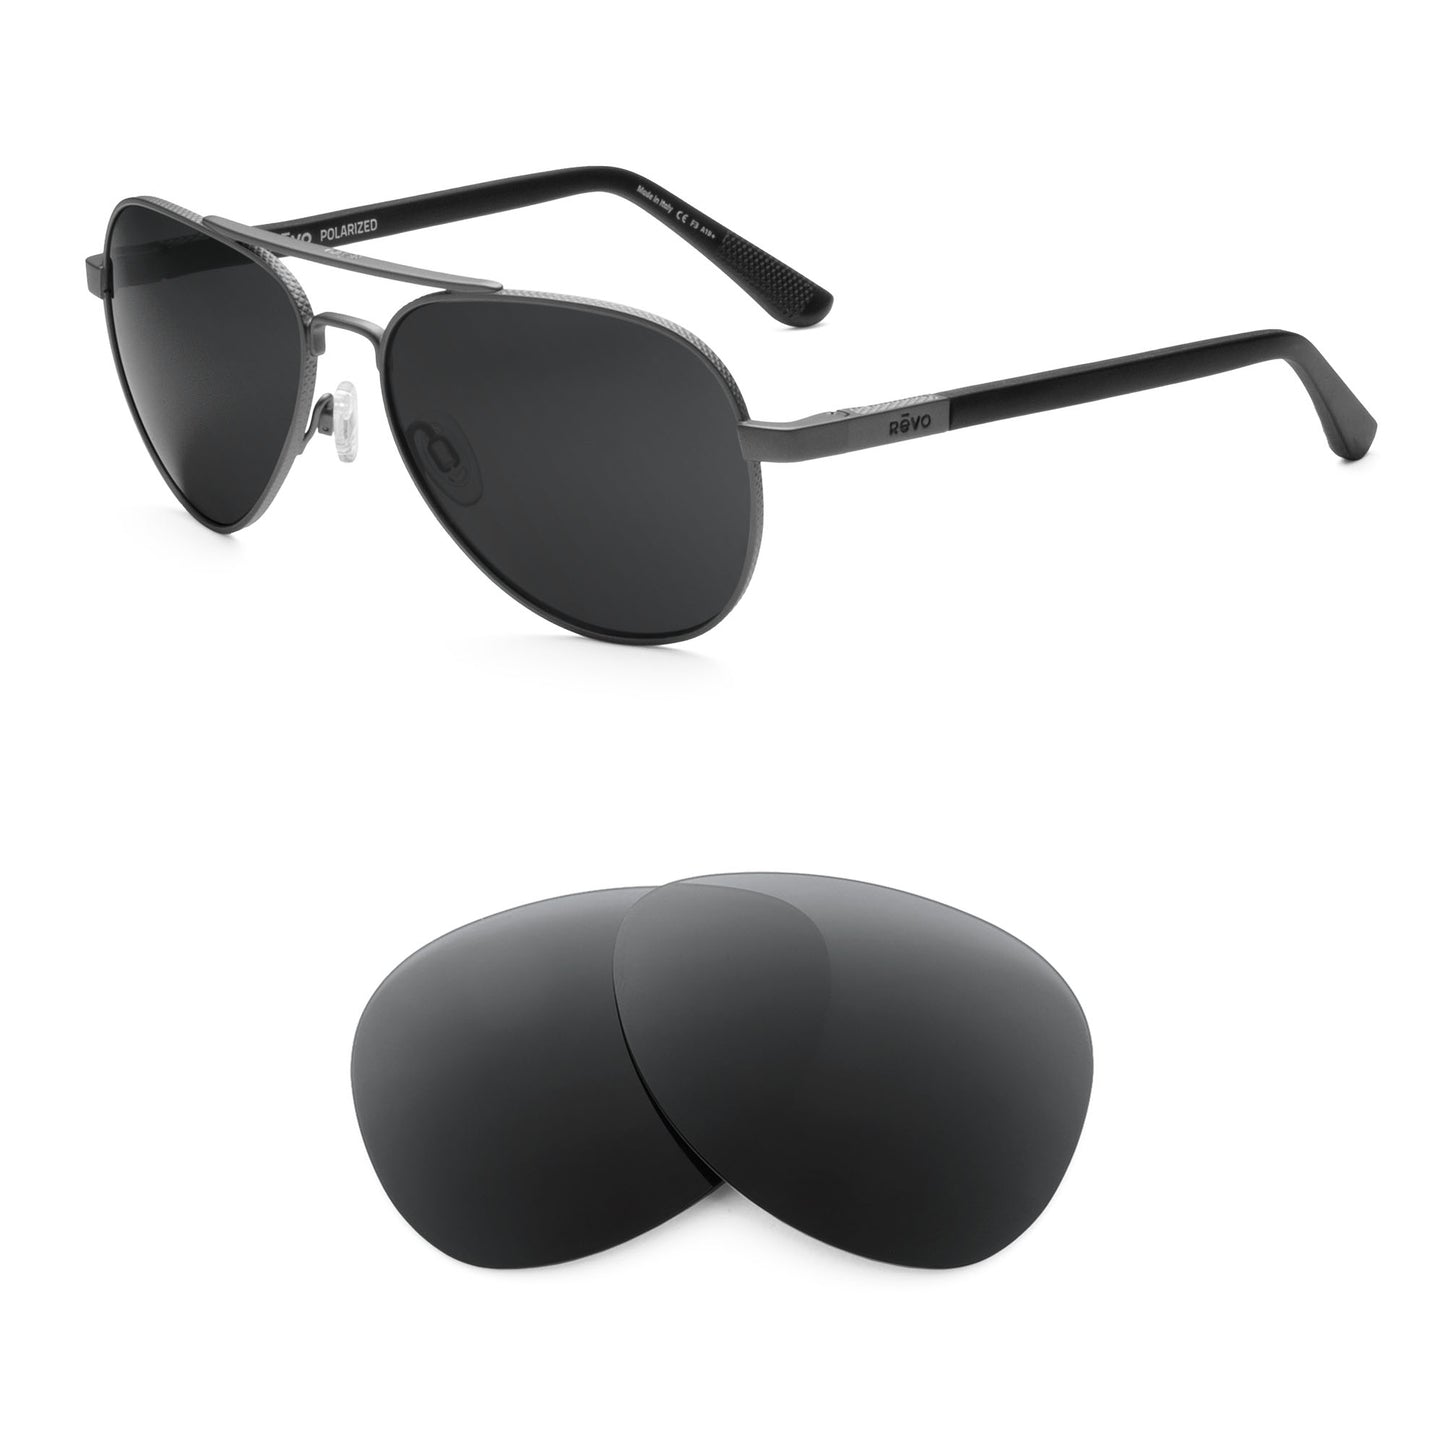 Revo Raconteur sunglasses with replacement lenses